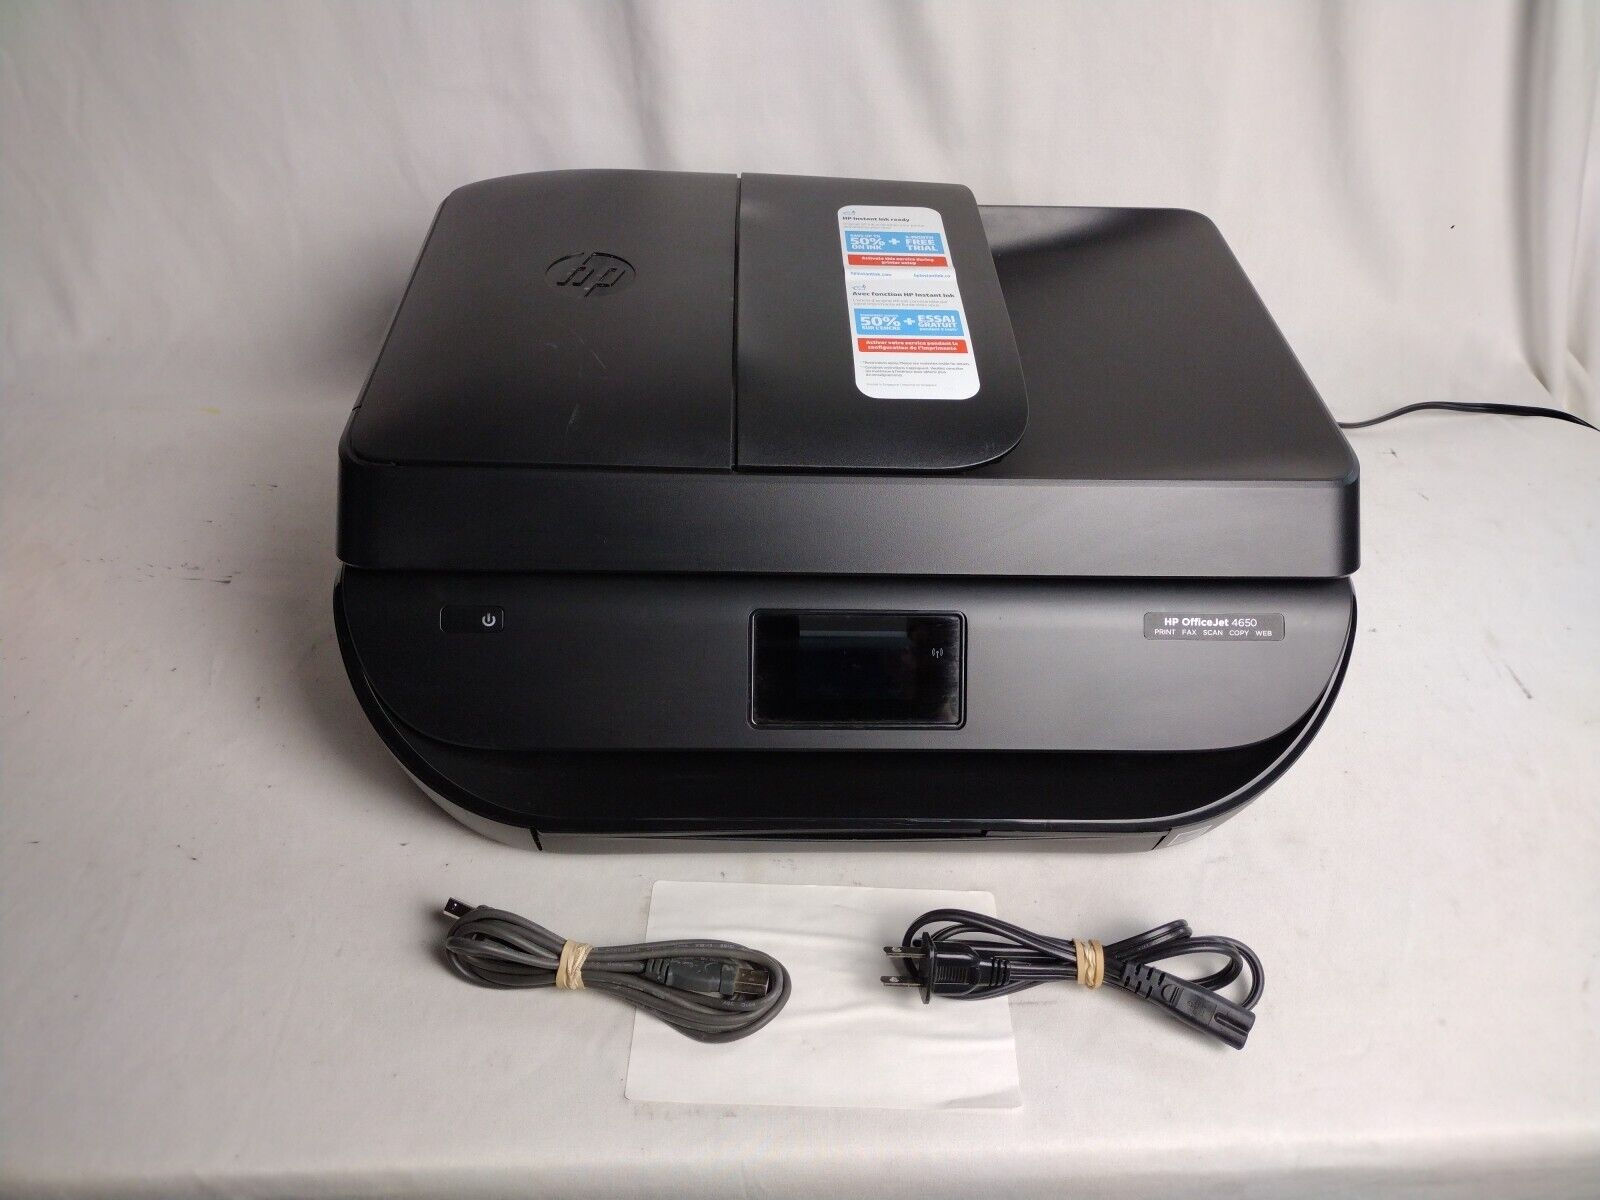 HP OfficeJet 4650 4654 All-in-One Printer Tested Works Low Pages Printed.